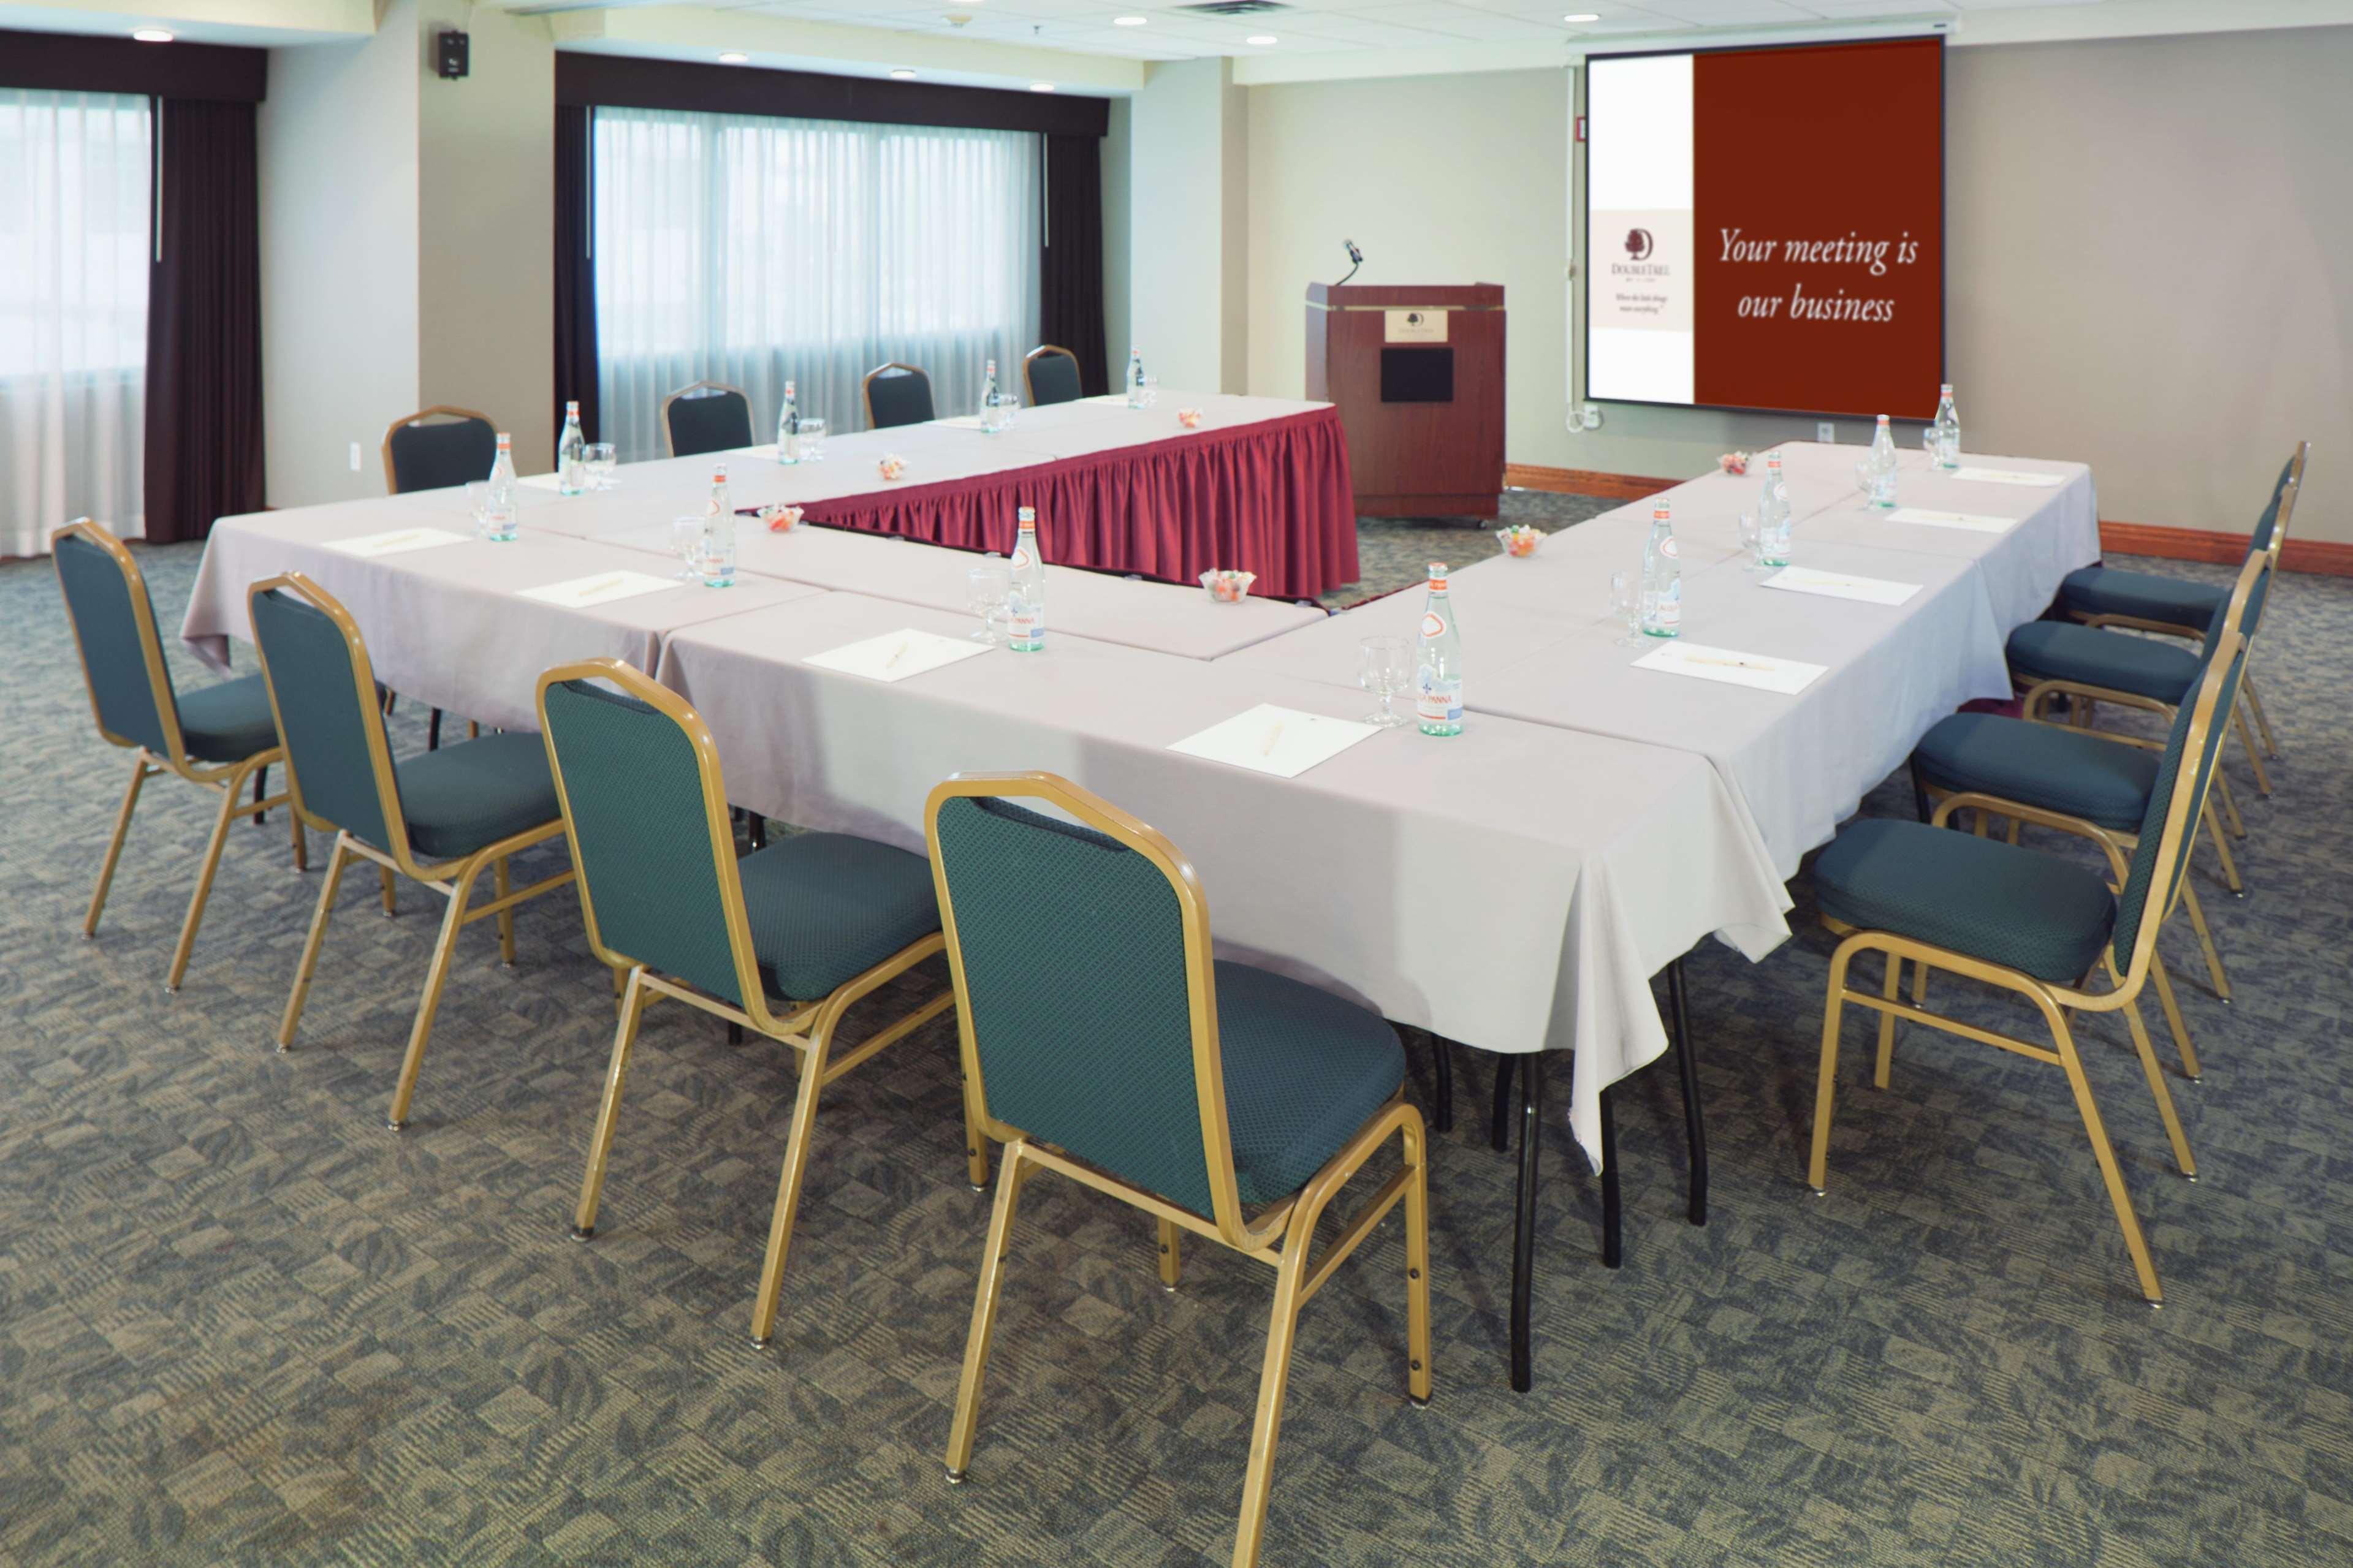 Doubletree By Hilton Hotel & Suites Jersey City Bisnis foto